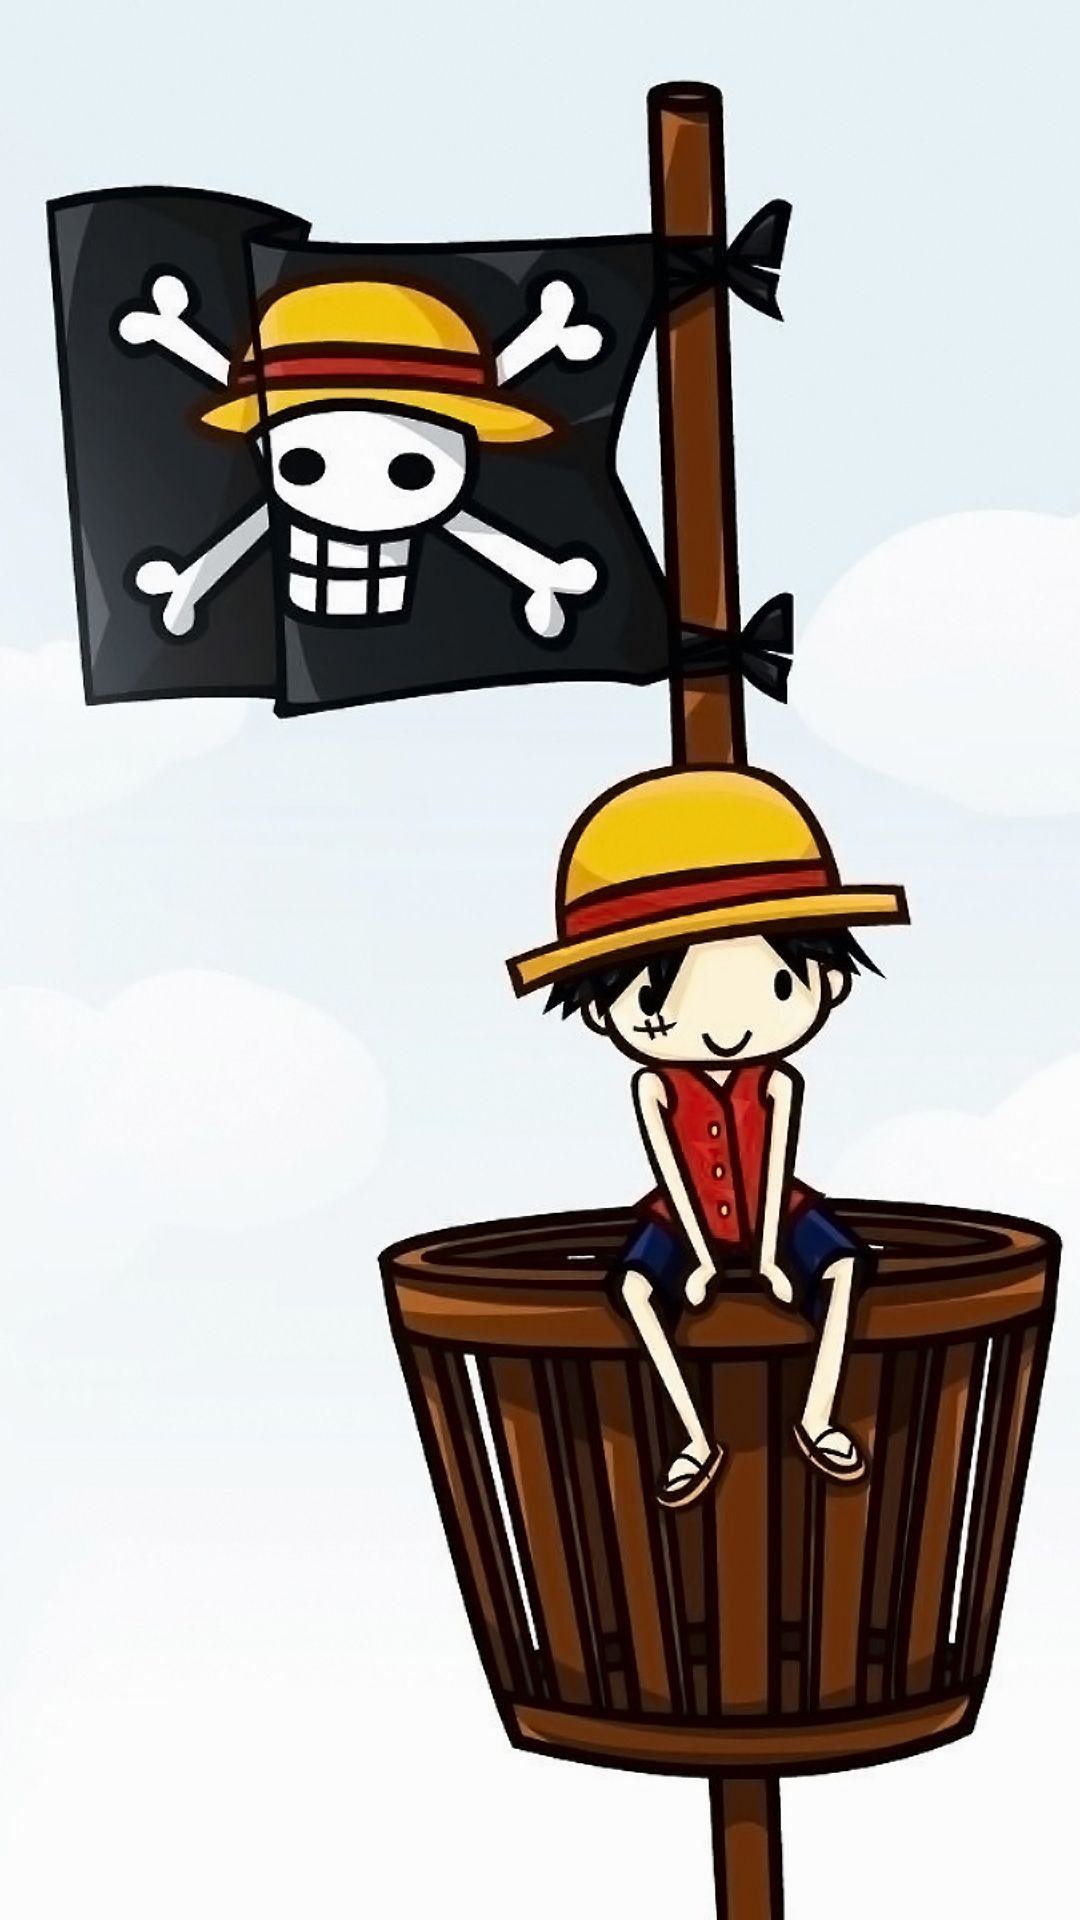 Wallpaper.wiki Free One Piece Iphone Image Download